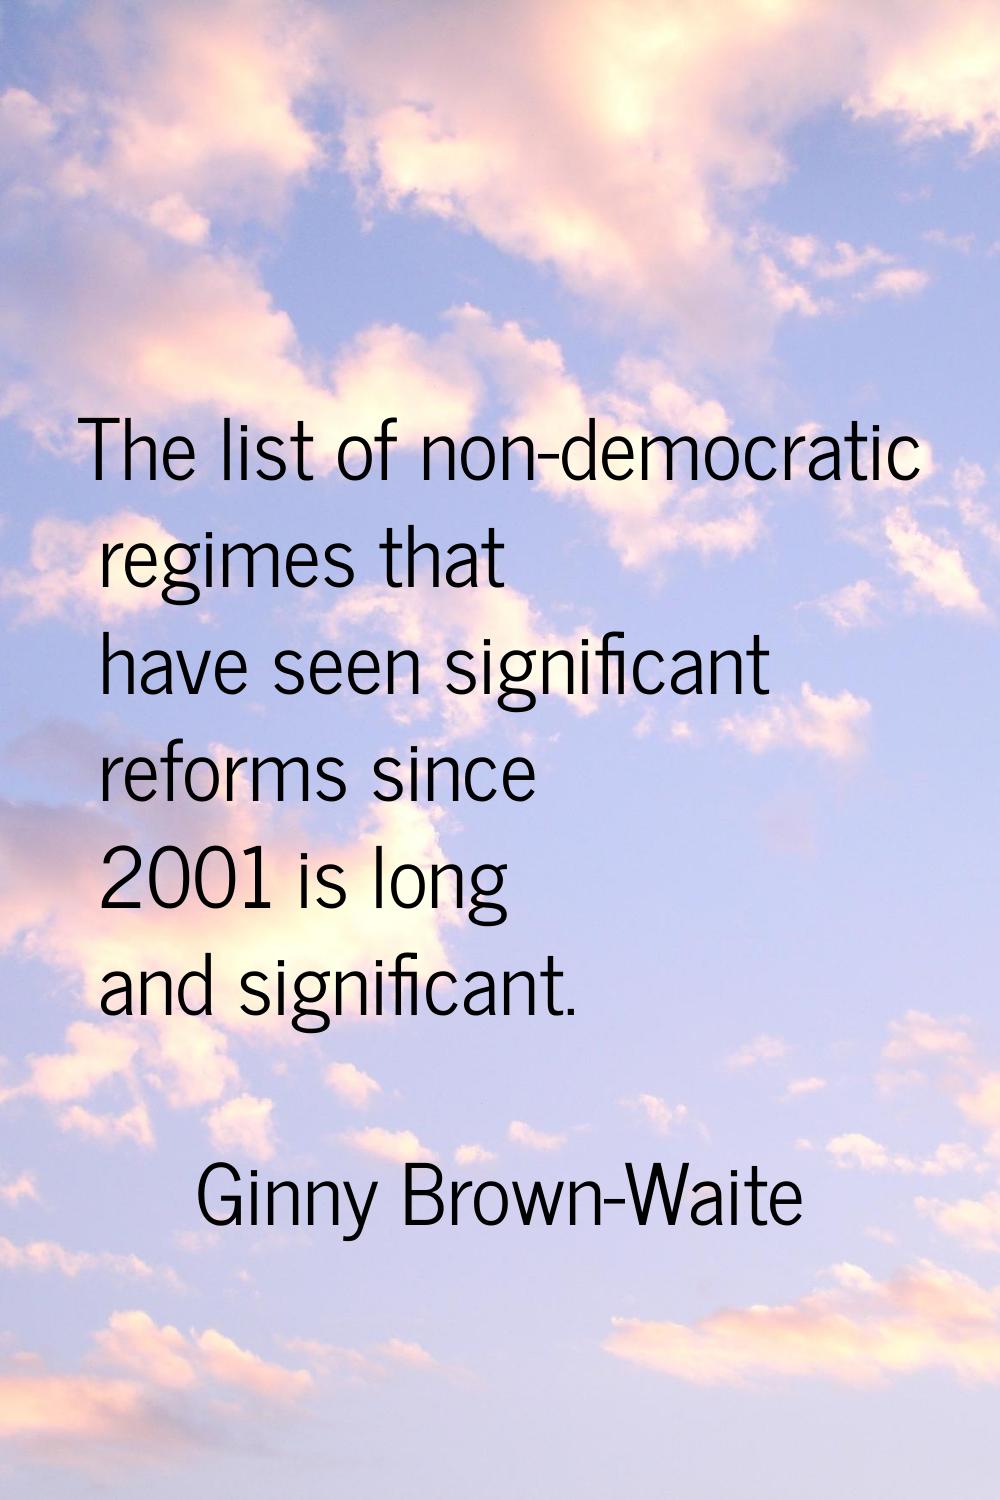 The list of non-democratic regimes that have seen significant reforms since 2001 is long and signif